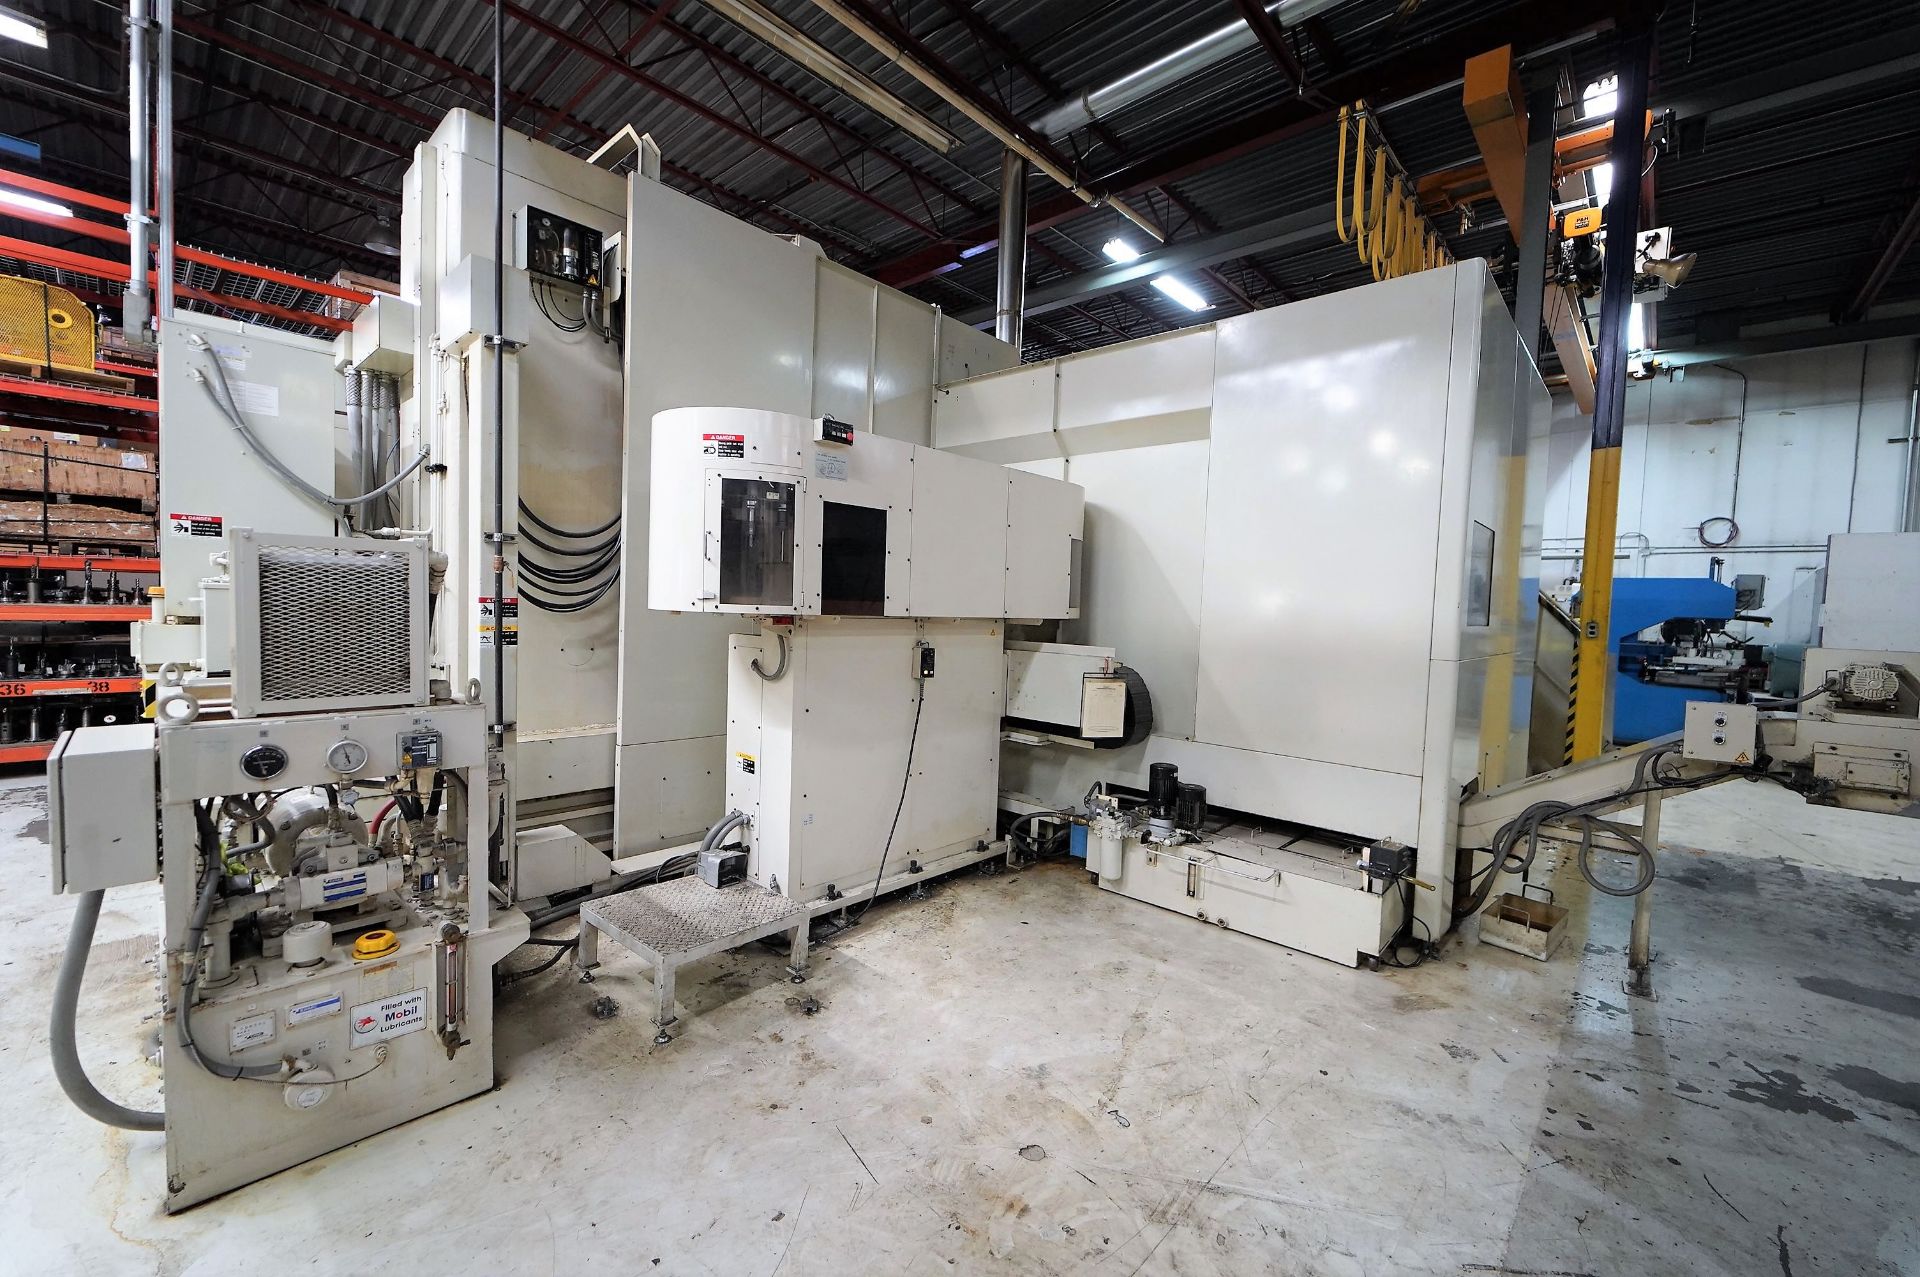 SNK HPS-120B 5-Axis CNC High Speed Aerospace Profiler & Machining Center With Pallet Changer - Image 15 of 20